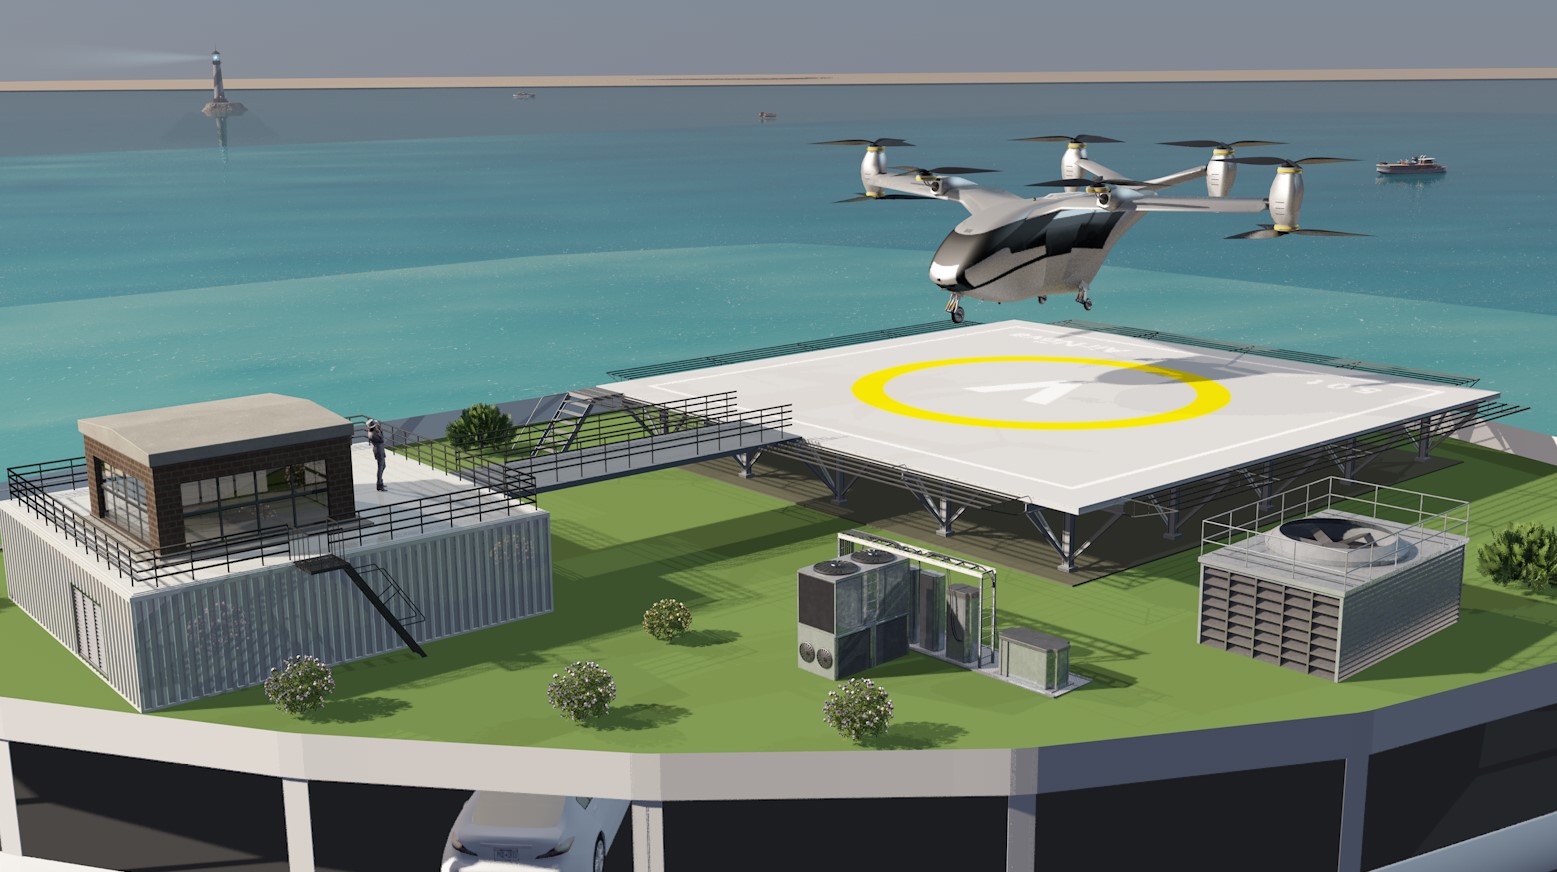 The small French AirNova startup has ambitious plans for lifting the nation’s ground transportation into the skies with emerging electric takeoff and landing vehicles (eVTOL), and is currently looking to raise funds for its project to build a network of multipurpose vertiports across France. The Bordeaux-based company is focused on achievable goals it believes will help it work toward its broader, nation-spanning ambitions. To that end, in October AirNova announced its campaign to raise $3.2 million for business development – a seemingly modest sum in a wider eVTOL sector attracting billions in investment at a time, but sufficient for the startup to rev up its vertiport plans. Those involve building a series of elevated aerial facilities based on its patented design, and make those available to a variety of operators, including air taxis, cargo transport, last mile delivery drones, and craft used by medical and emergency services. Read: First crewed eVTOL air taxi test flight at Rome AAM vertiport debut Several established and considerably larger groups are already at work creating that kind of infrastructure, including Skyports, Volocopter’s ground services unit, and even the Urban Blue company backed by a collective of airport operators in Italy and southern France. But AirNova CEO Laurent Mathionlon believes the particular experience of his small team, and their intimate knowledge of French urban, social, and business workings give them the assets to punch far above their weight – and carve out a solid foothold in emerging air transport services. AirNova is currently doing studies on about 10 vertiport test sites, and is developing its proprietary design concept to fully meet the needs of eVTOL manufacturers the company consults with. The model is based on an elevated structure whose lower floors will be used for travel functions – reception, check-in, waiting areas, etc. – and whose roof is outfitted with two landing pads and a pair of recharging and maintenance spots. While that may not be radically different from the approach other vertiport companies are taking in developing eVTOL infrastructure, AirNova is already thinking well beyond individual or single-city strategies, and envisioning a nation-wide network built from region-conntecting installations. In addition to inner-urban goods and passenger transport covering distances of 10 to 30 km, AirNova vertiports aim to create links between more remote cities and regions with eVTOL flights of 50 to 300 km. As often the case with similar projects, AirNova terminals will serve as hubs to nearby ground transport including buses, subways, and commuter trains. “Our objective is to propose new use values through innovative development… for the benefit of our customers who will operate on-site,” explains Mathiolon, a veteran in French real estate management who in recent years has been specializing in eVTOL opportunities in the field. “For over three years I’ve been working on a new form of air mobility, using our patented AirNova design to develop vertiport infrastructure in France, then in Europe, for drone transport of both goods and people.” Will it work with so many larger competitors already in full stride? AirNova believes so, and continues recruiting business angels, institutional investors, and even eVTOL craft makers like Airbus, with which it consults in developing its vertiport project. Read: UAM partnership to promote Airbus eVTOL air taxis in Italy Meanwhile, opportunities remain fairly promising for forward-thinking companies in France, where infrastructure construction for next-generation aircraft isn’t exactly ahead of the curve, despite the nation expected to host the world’s first air taxi services during the Paris 2024 Olympics. AirNova eVTOL vertiports